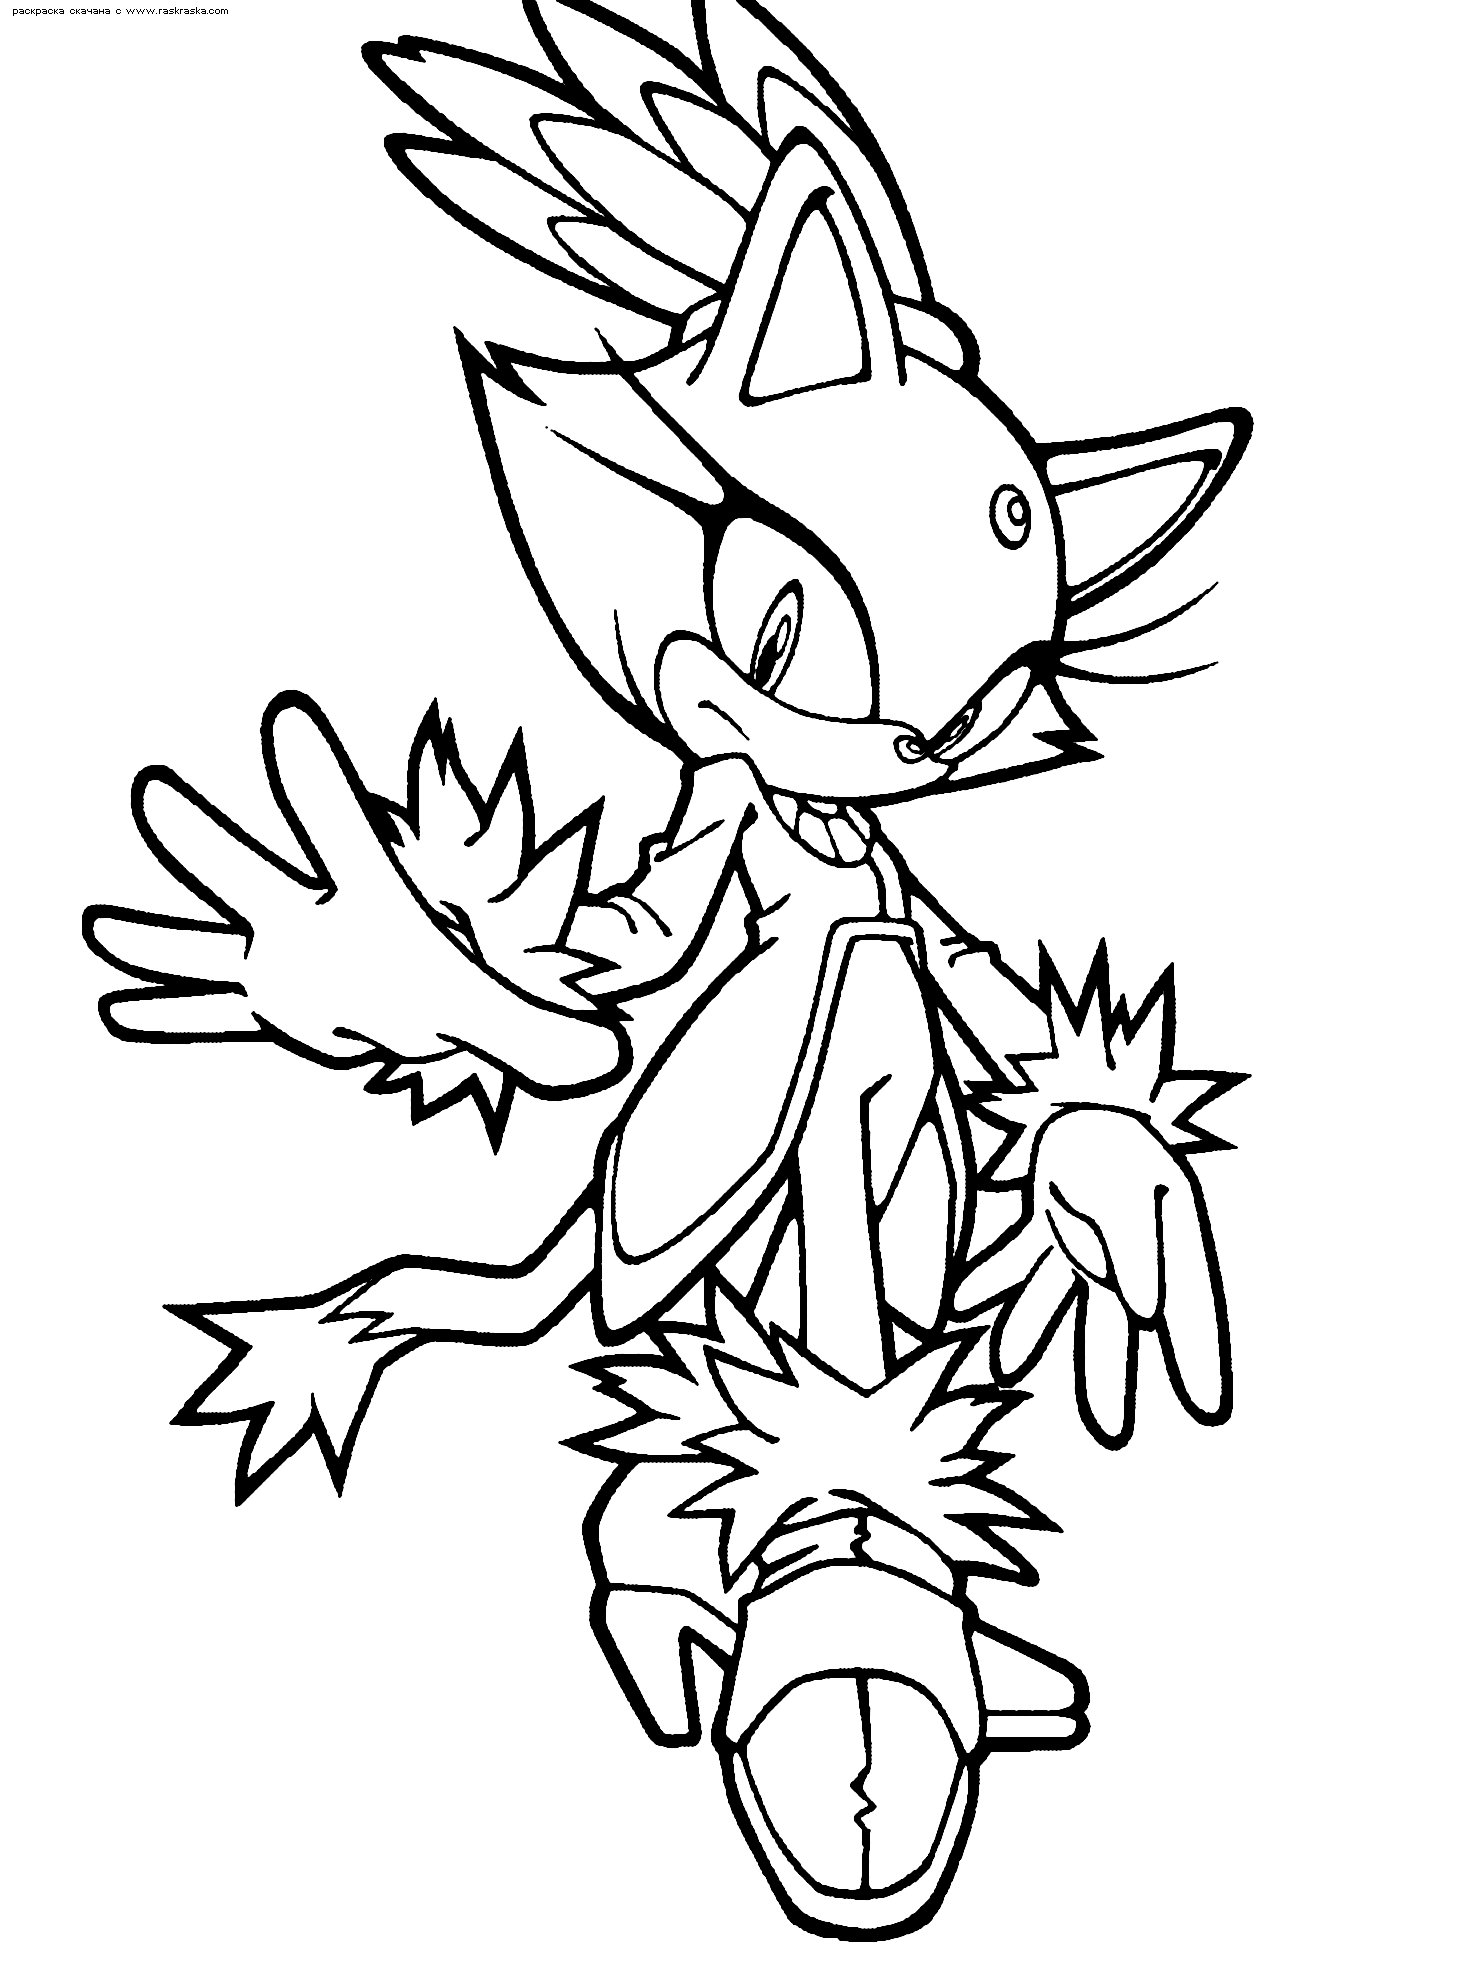 classic sonic coloring pages